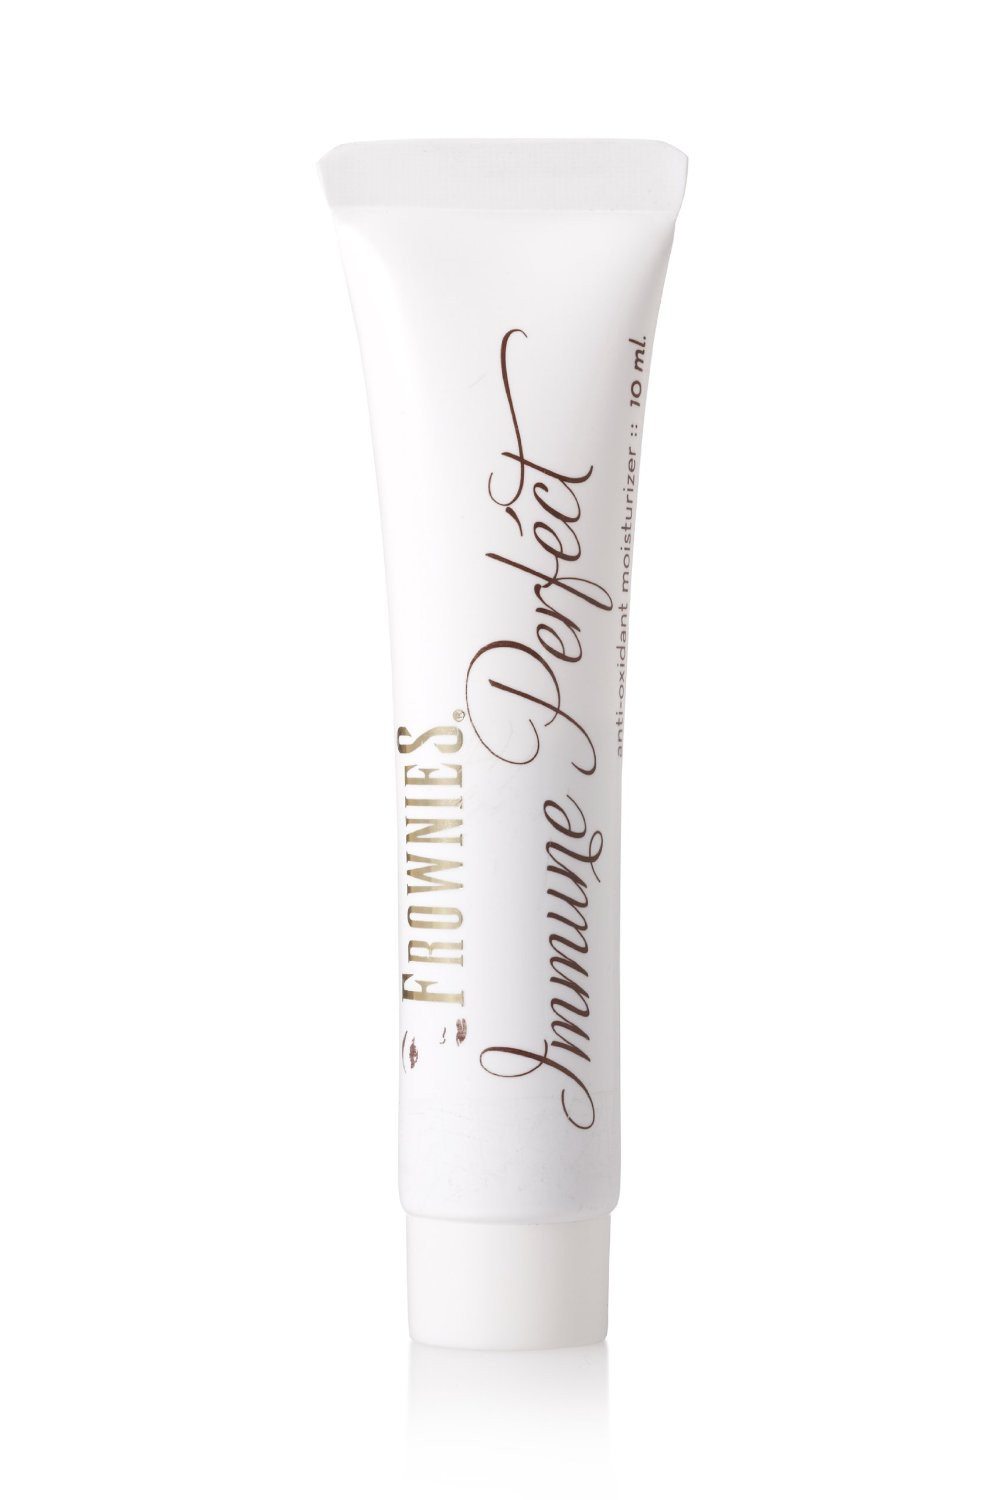 FROWNIES IMMUNE PERFECT DAILY MOISTURIZER 10MLSkin CareFROWNIES